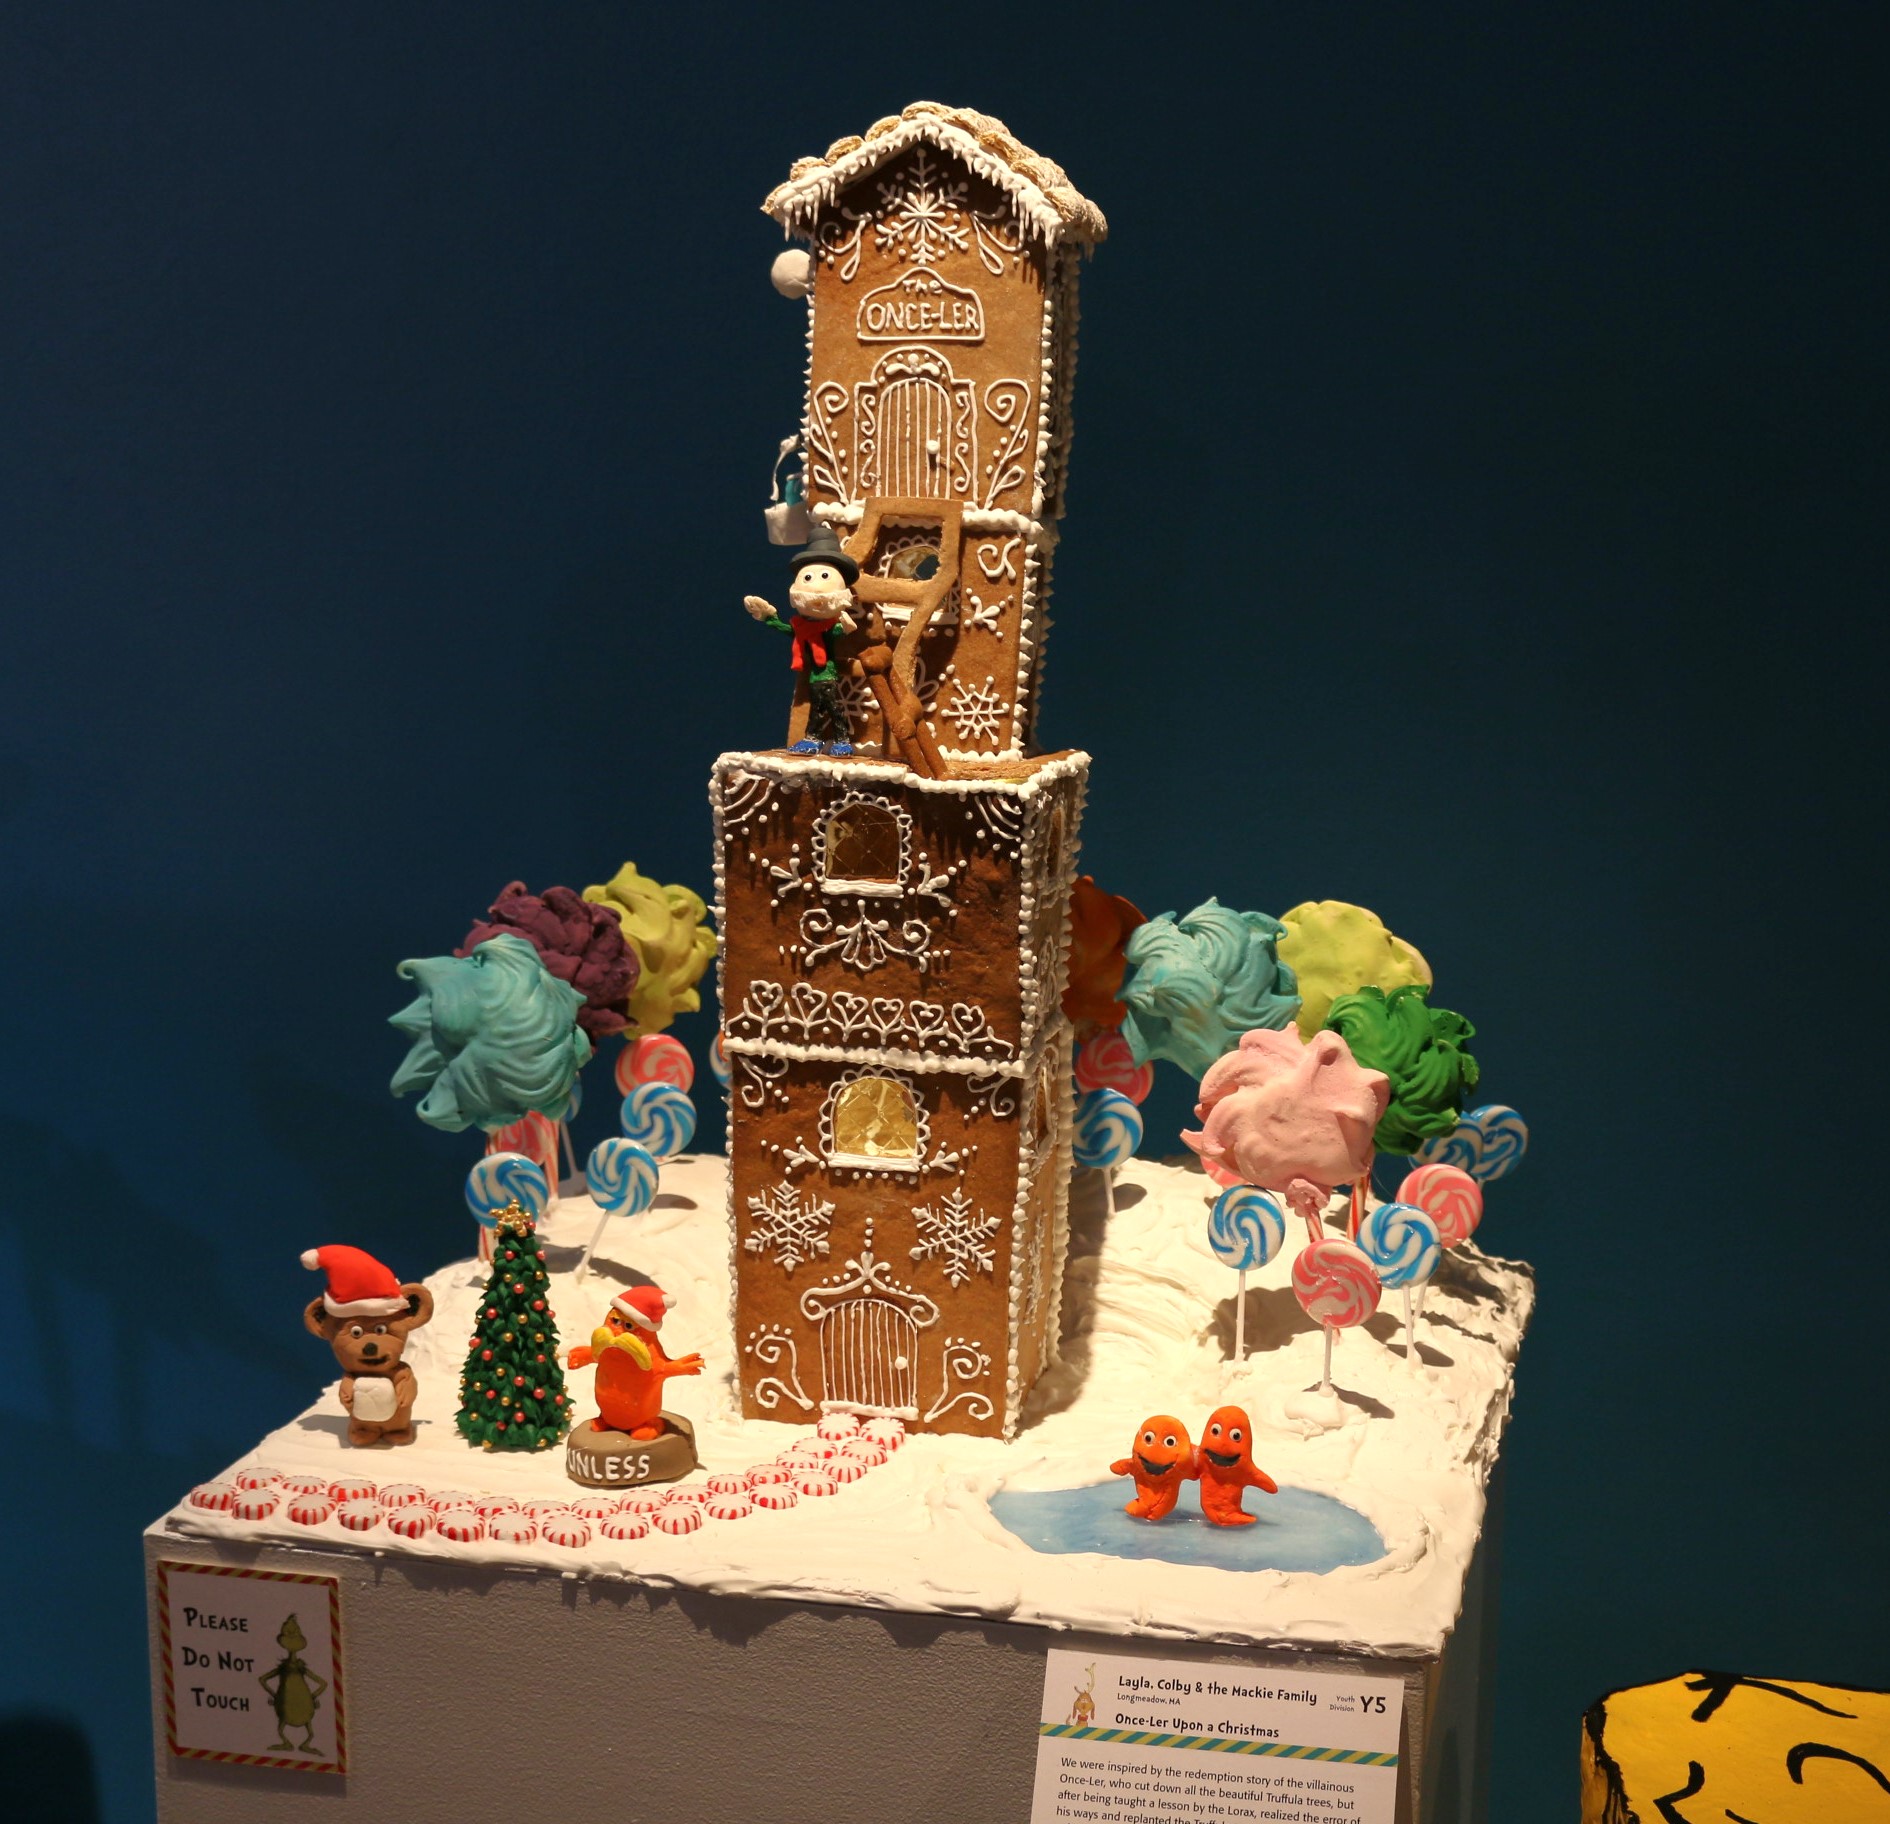 Gingerbread display titled "Once-ler Upon a Christmas" by Layla, Colby & the Mackie Family